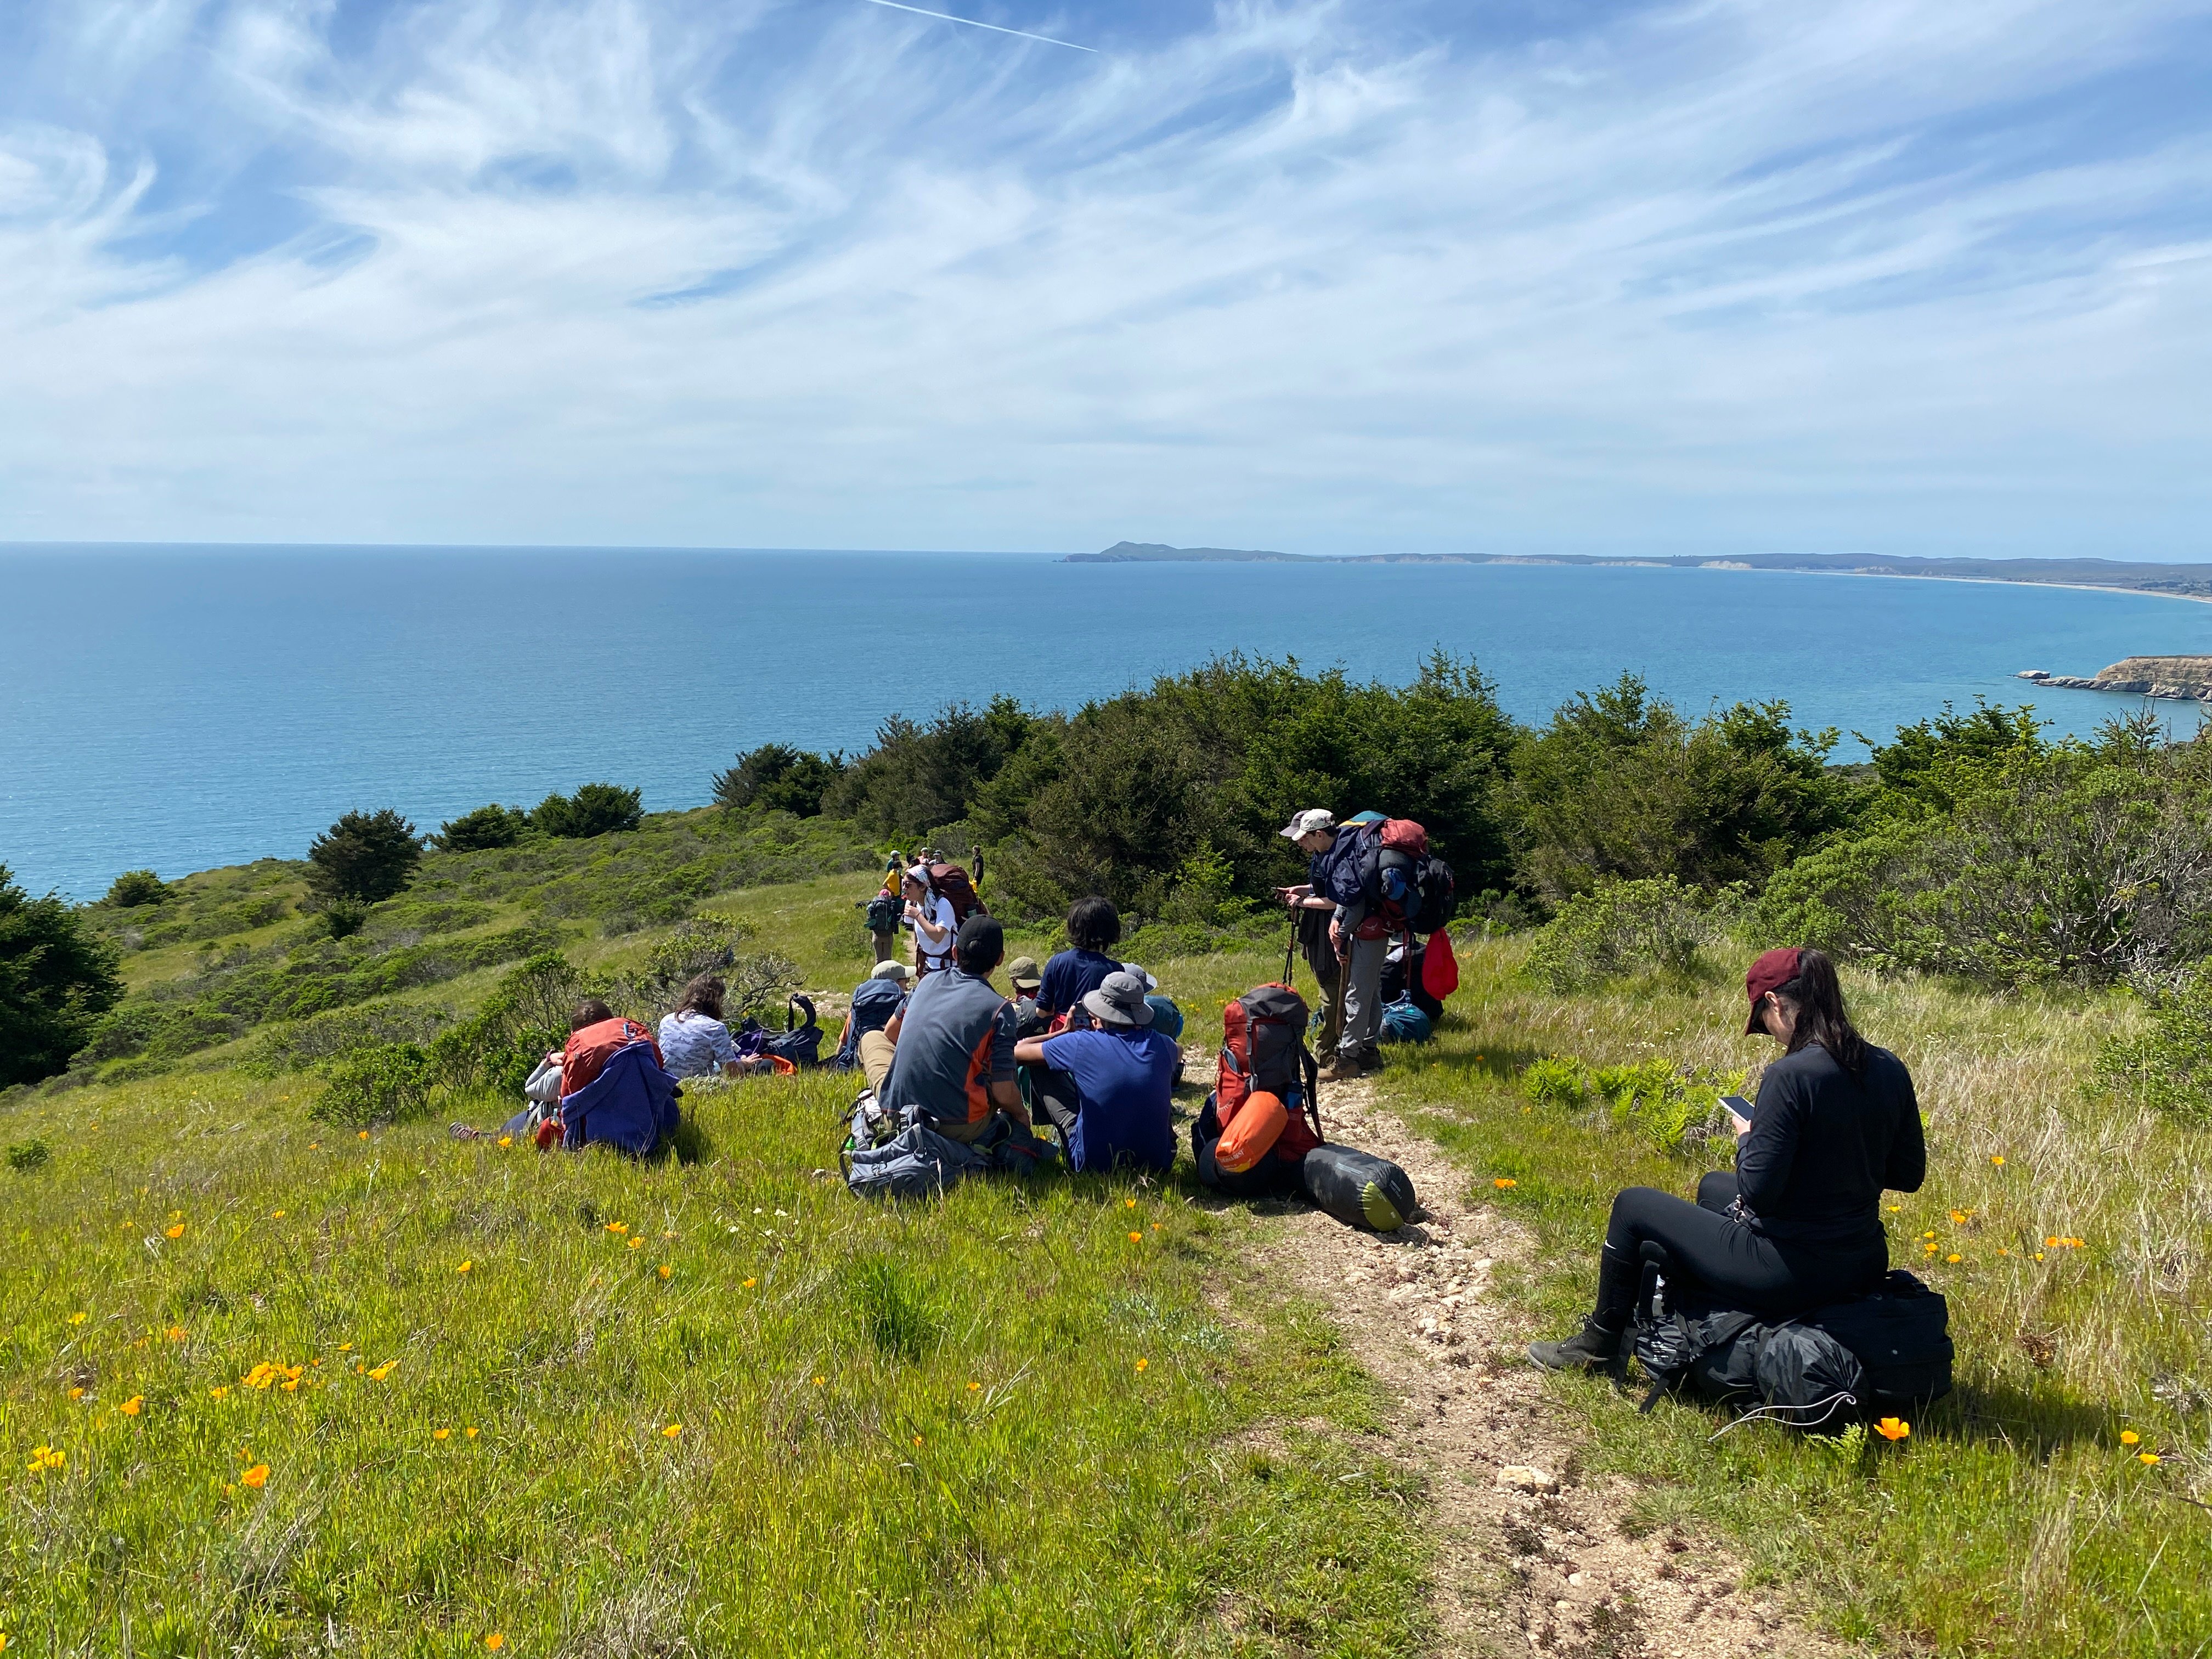 Students resting on their hike on a bluff overlooking the Pacific Ocean.